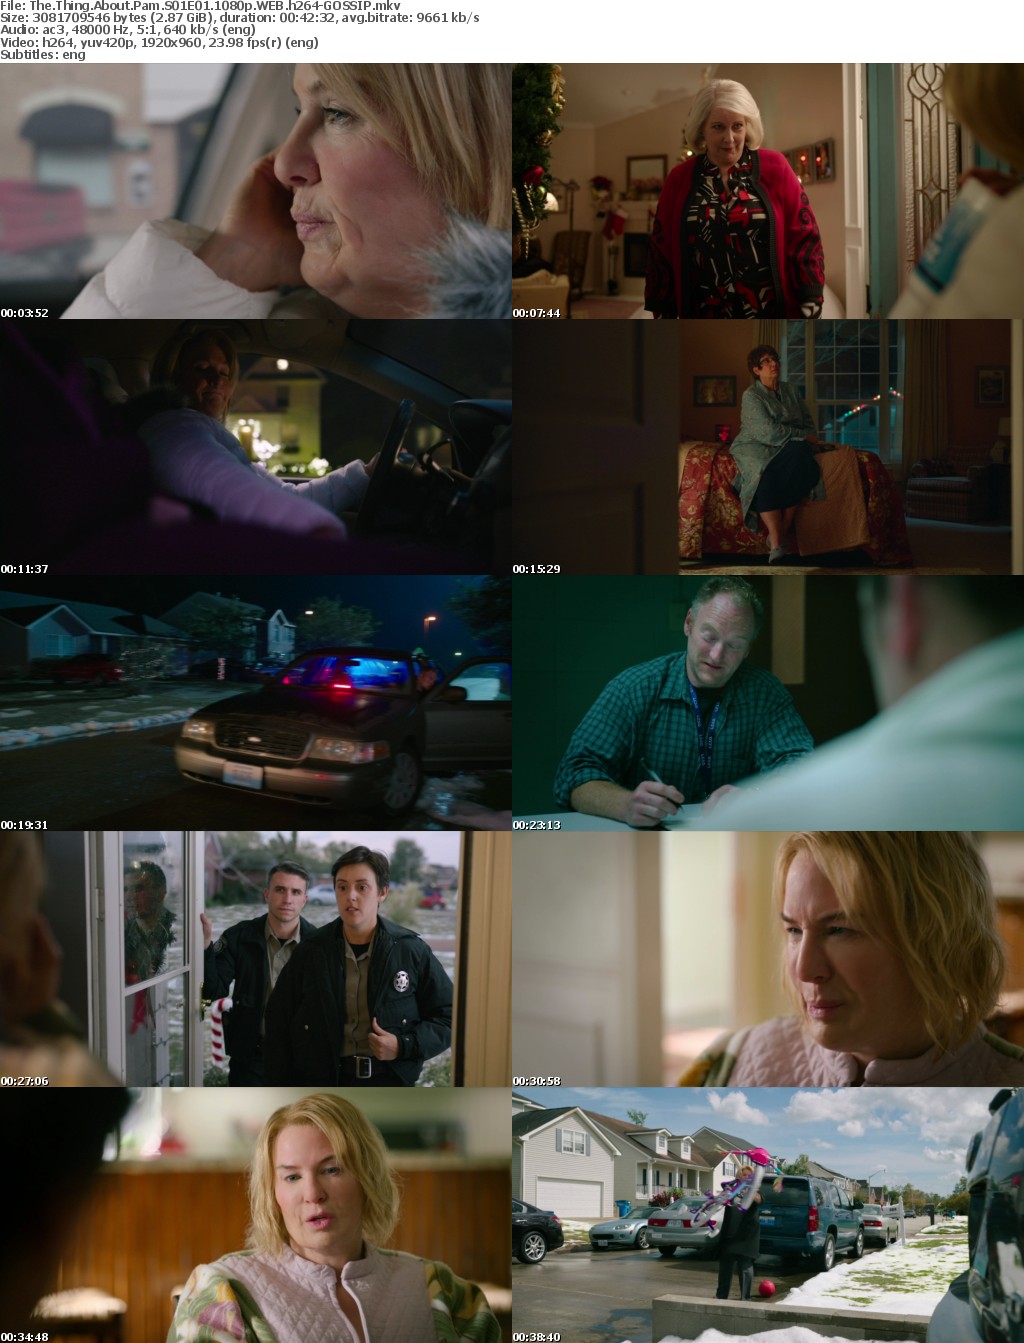 The Thing About Pam S01E01 1080p WEB h264-GOSSIP